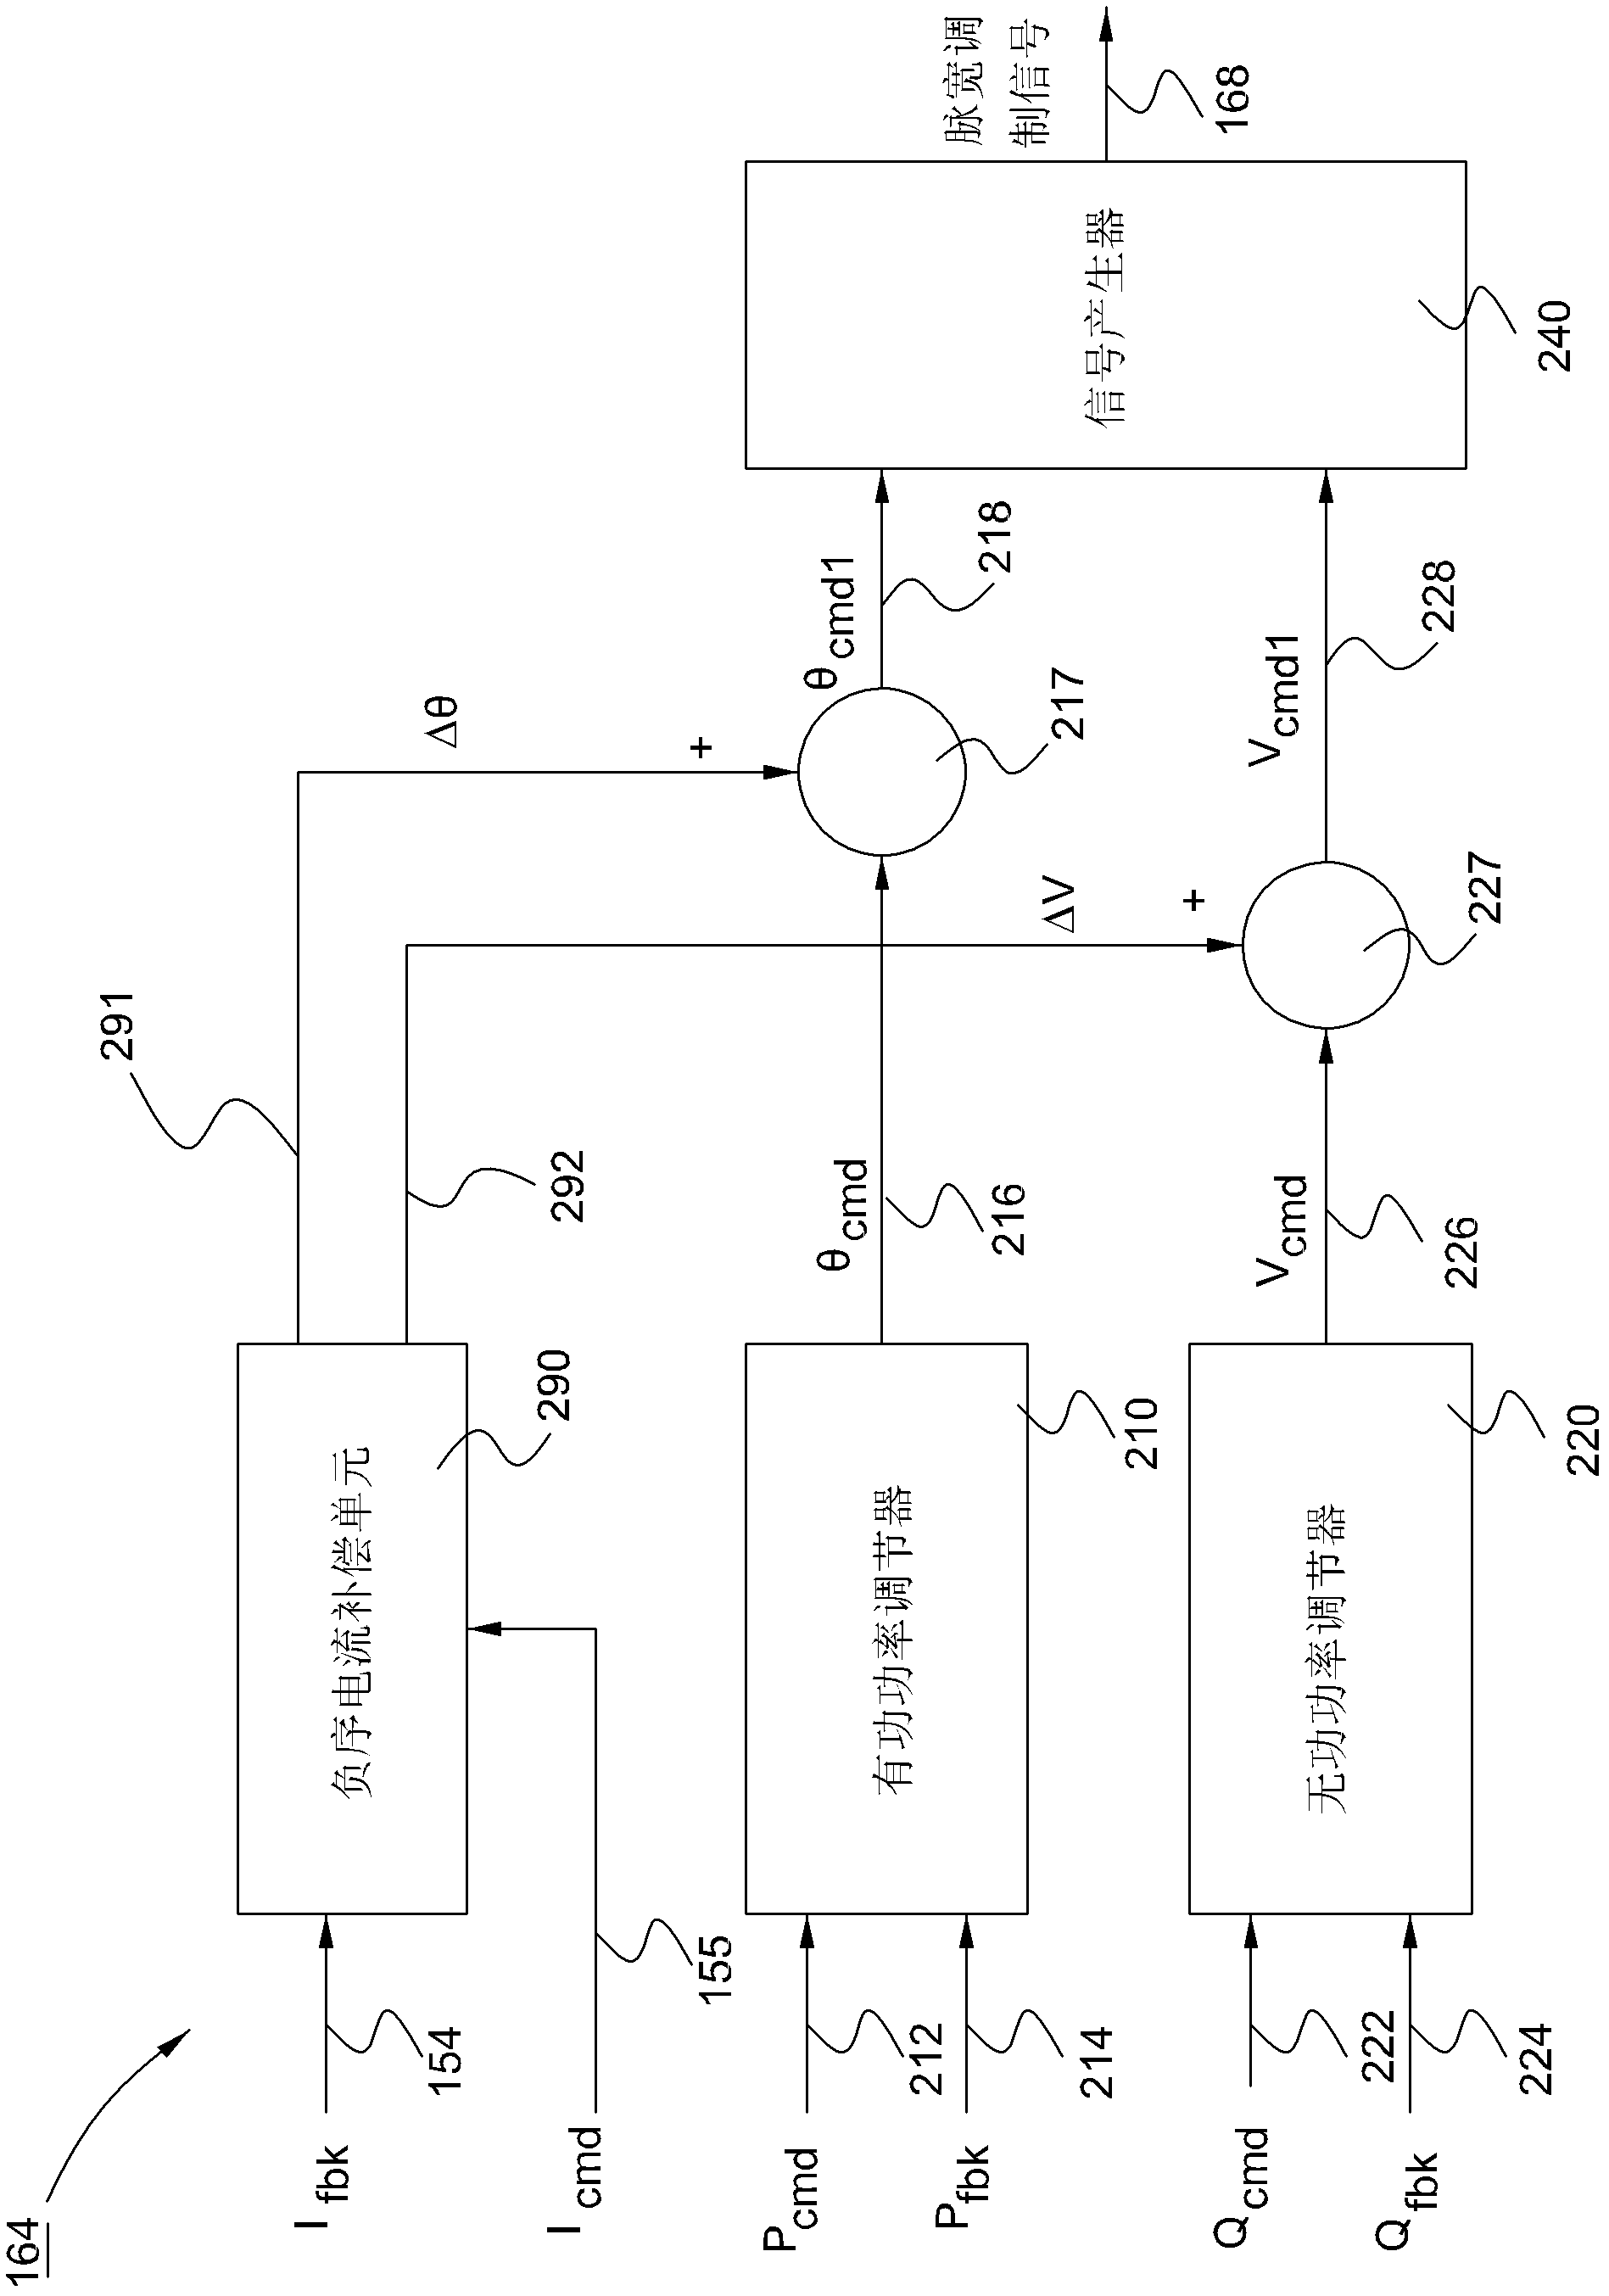 Energy conversion system and method with negative-sequence current compensation mechanism